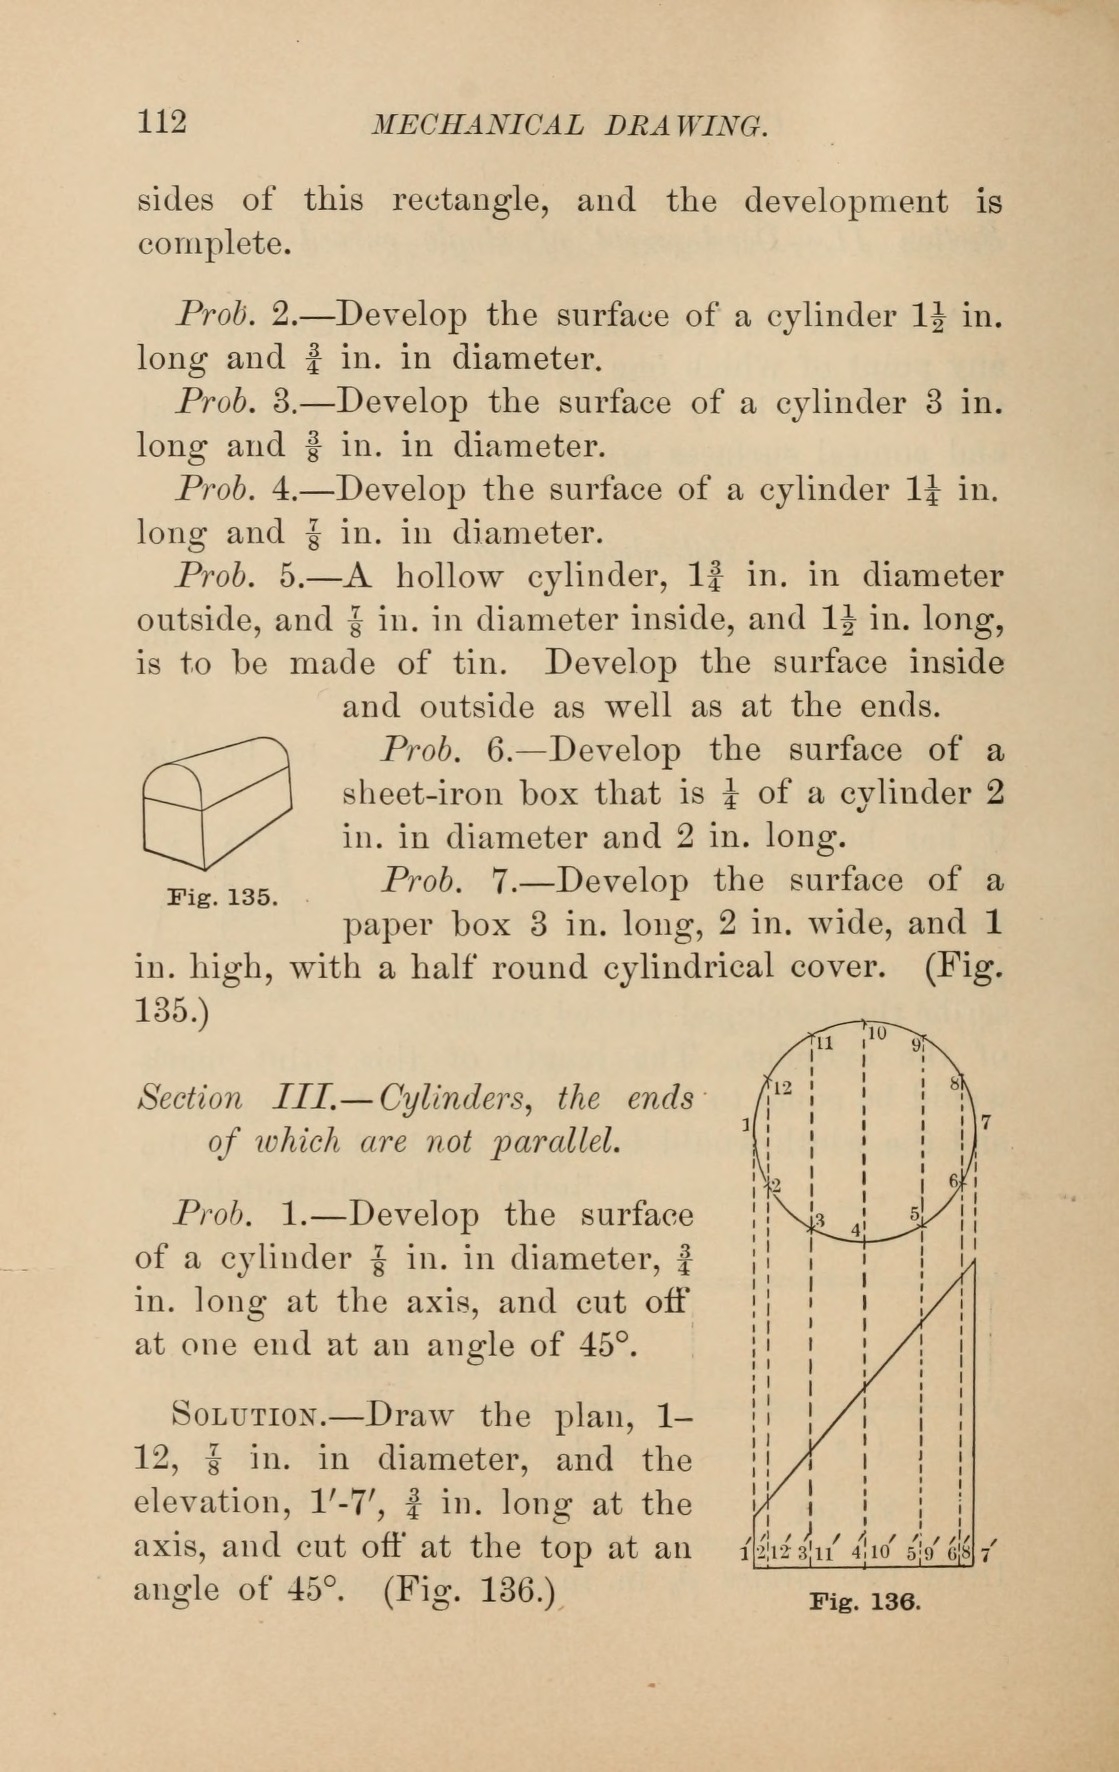 [Frank Aborn] Elementary mechanical drawing, for school and shop [English] 116